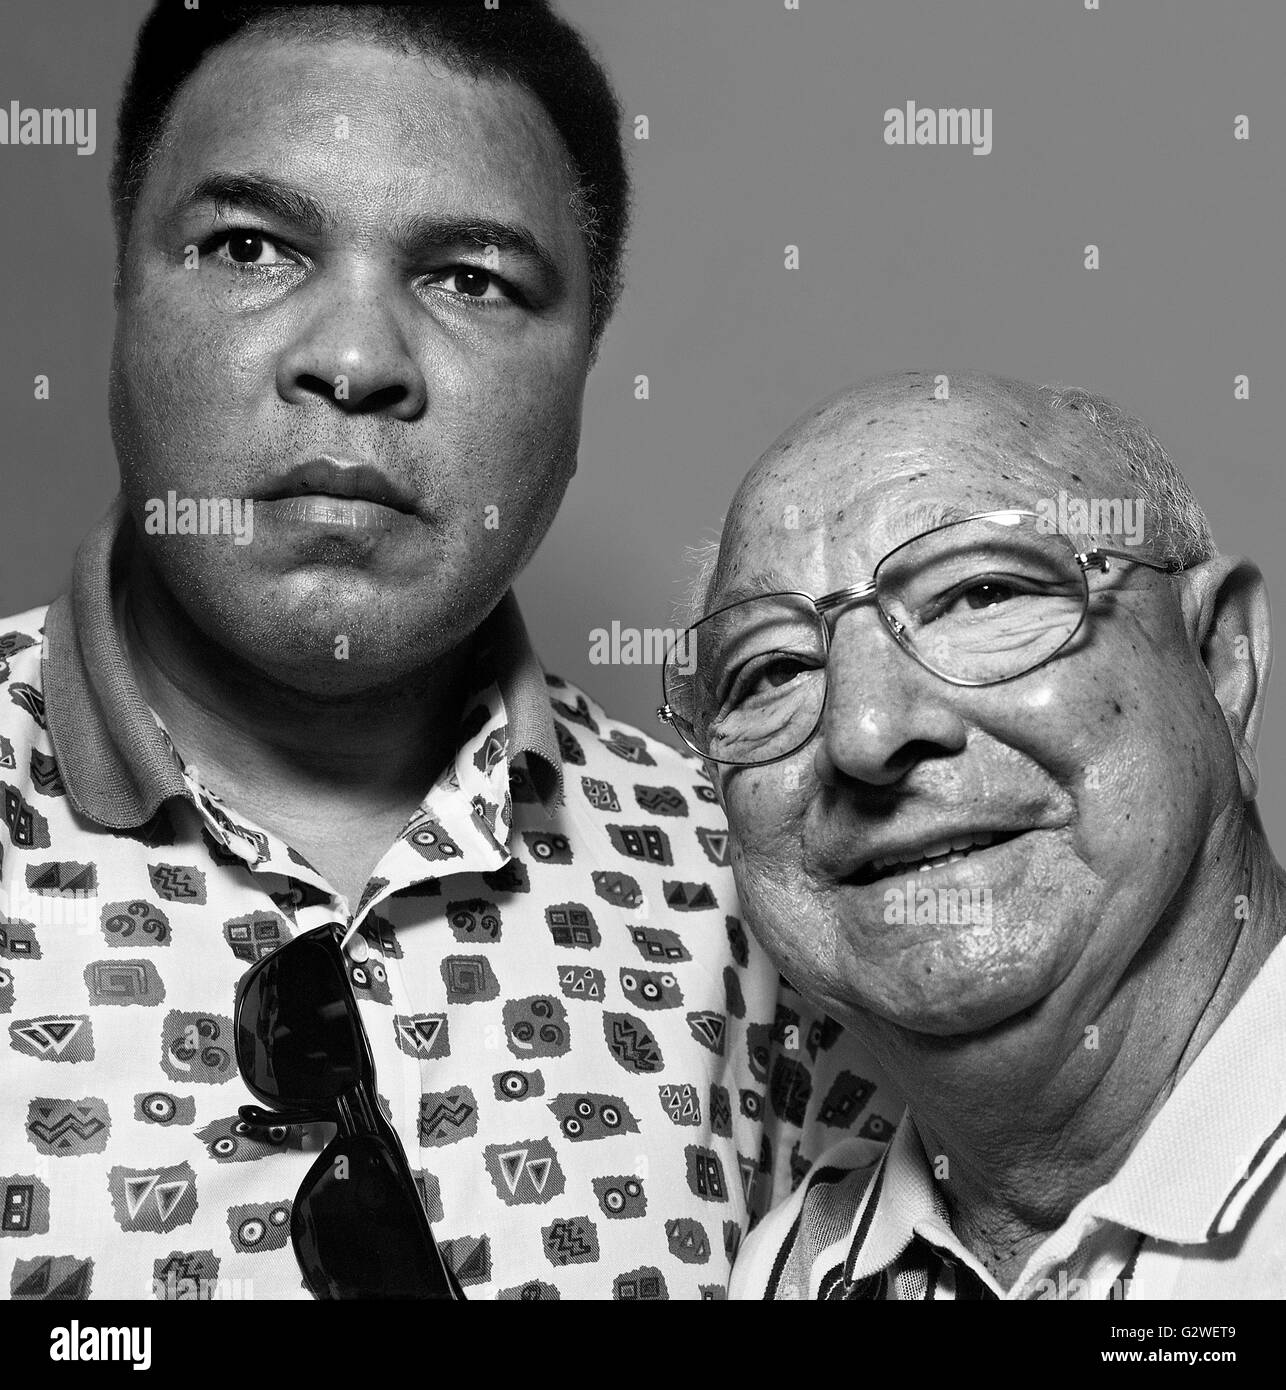 Tampa, Florida, USA. 1st Feb, 2012. Renowned boxing trainer ANGLEO DUNDEE has died at the age of 90. Dundee, who helped train Muhammad Ali and Sugar Ray Leonard, passed away in Tampa. Pictured with MUHAMMAD ALI in March 1998 in South Florida. (Credit Image: © David Jacobs/ZUMA Press) Credit:  ZUMA Press, Inc./Alamy Live News Stock Photo